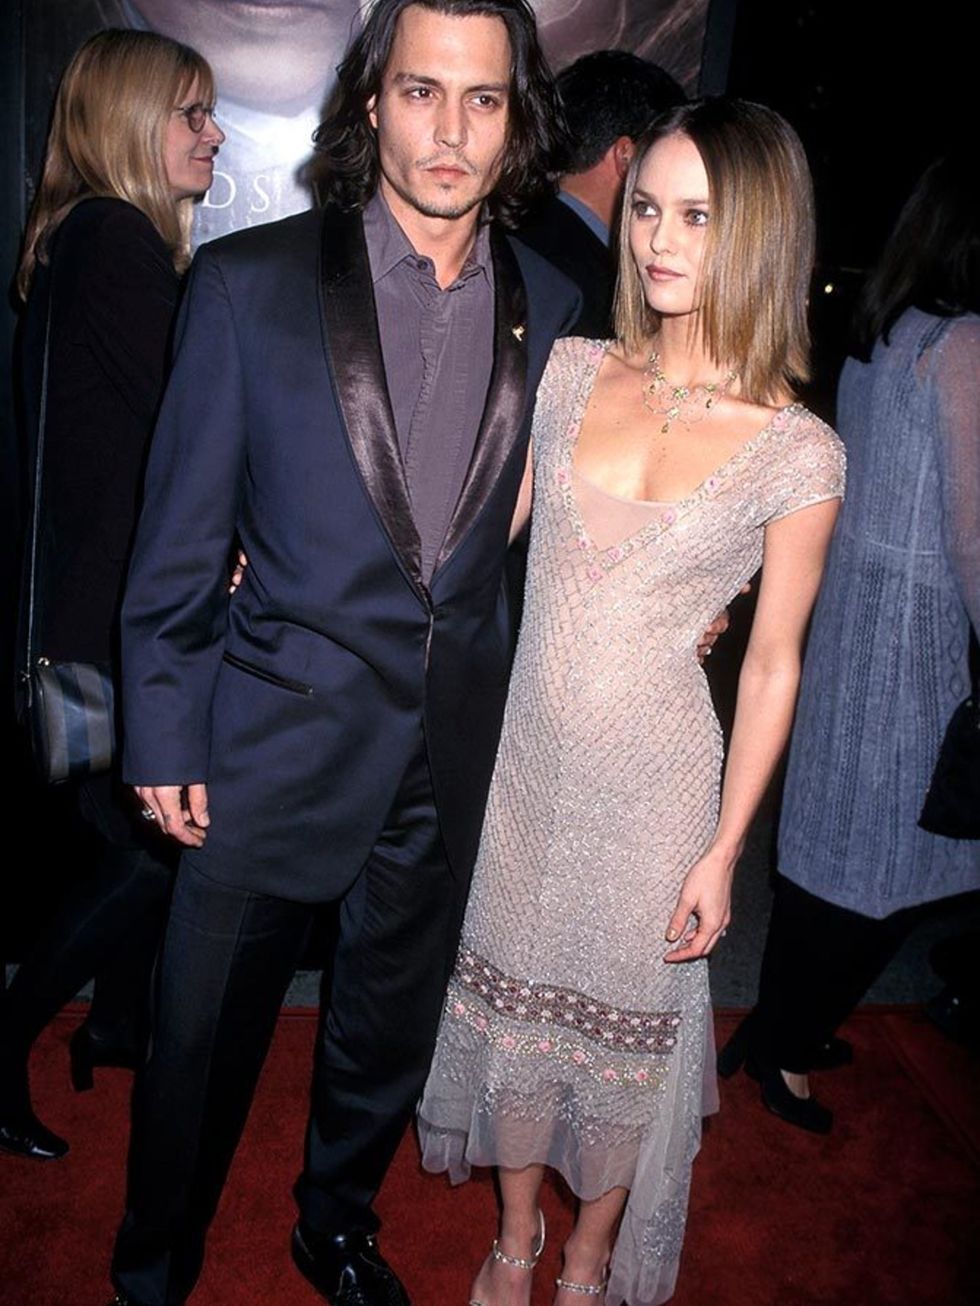 <p>Vanessa Paradis, who was with Depp for 14 years and with whom he has two children, is no less interesting. </p>

<p>She's French for a start, which makes Johnny pretty adventurous for an American. And she once dated guitar God Lenny Kravitz, which give